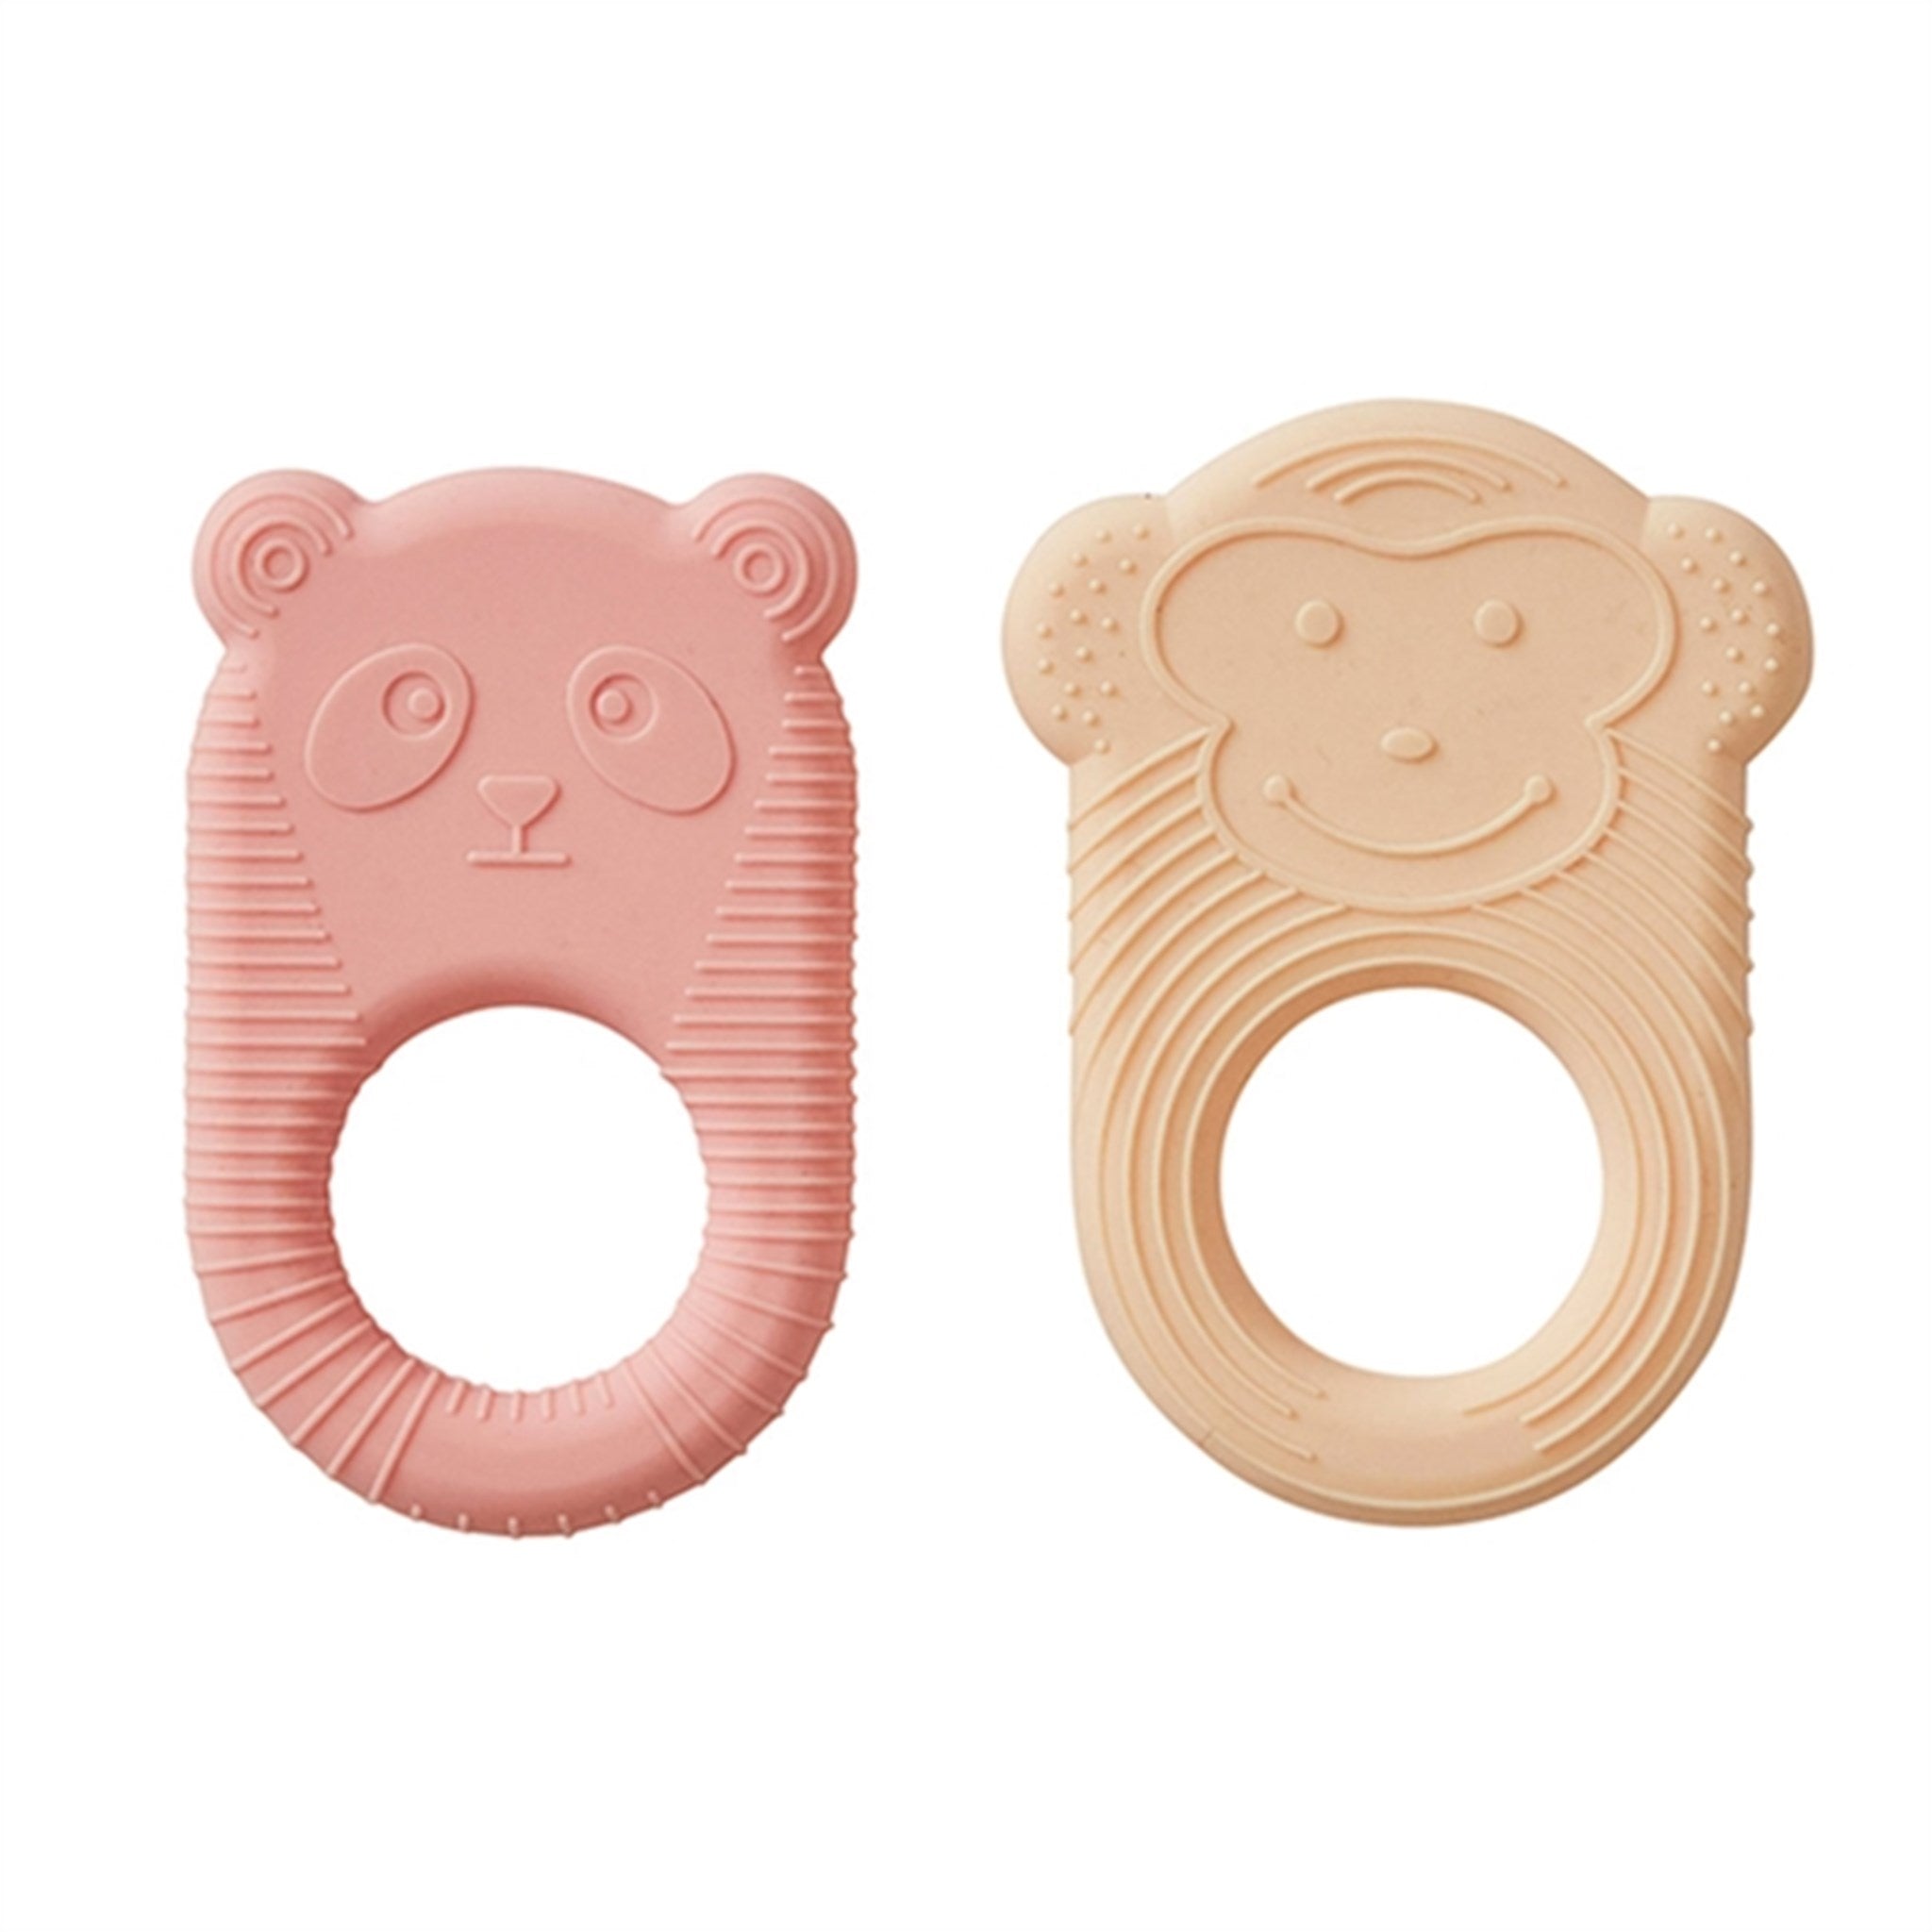 OYOY Nelson & Ling Ling Teether 2-Pack Vanilla/Coral